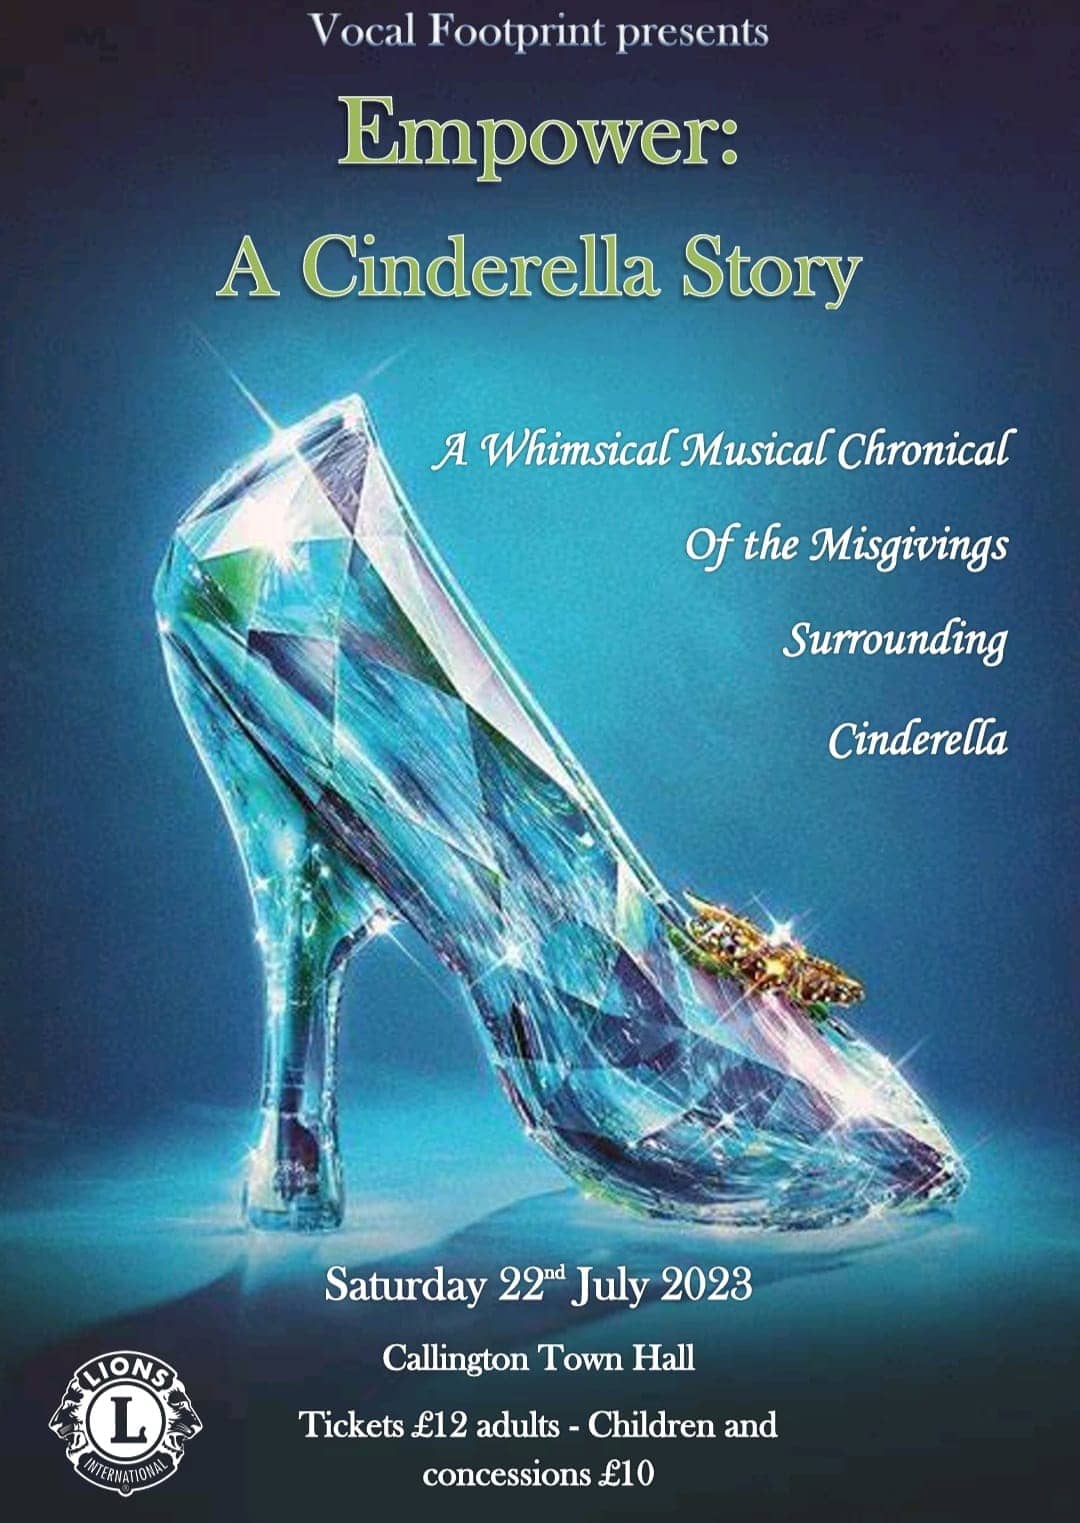 Empower: a Cinderella Story. Taking place 22nd of July at Callington Town Hall, Starting 4pm 